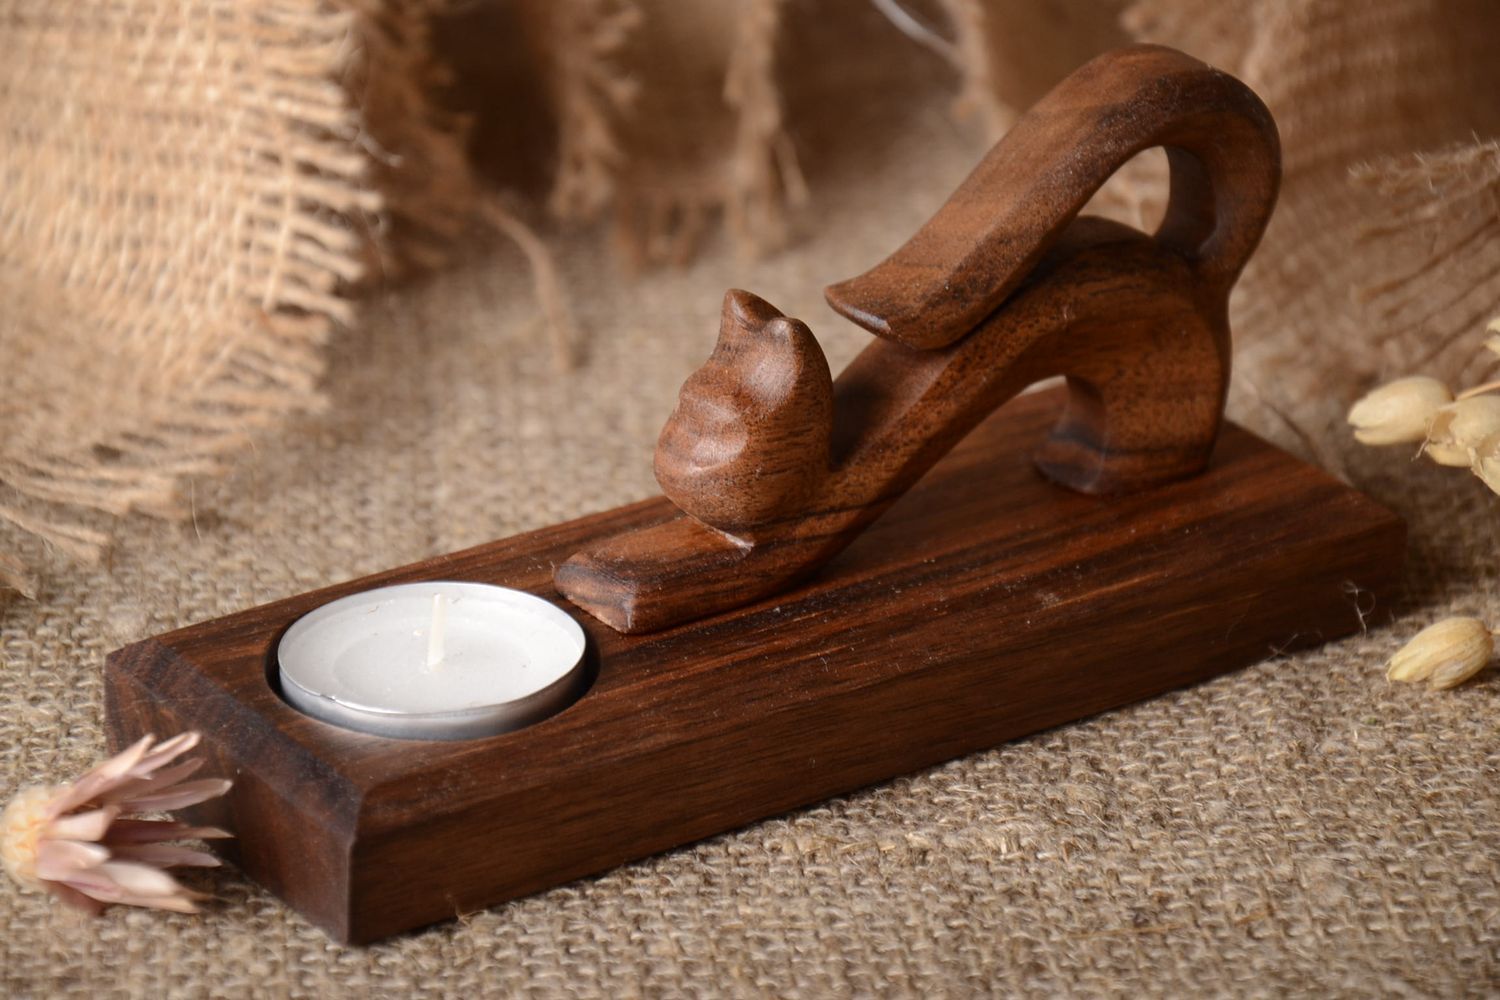 Handmade candlestick wooden candle holder decorative use only gift ideas photo 1